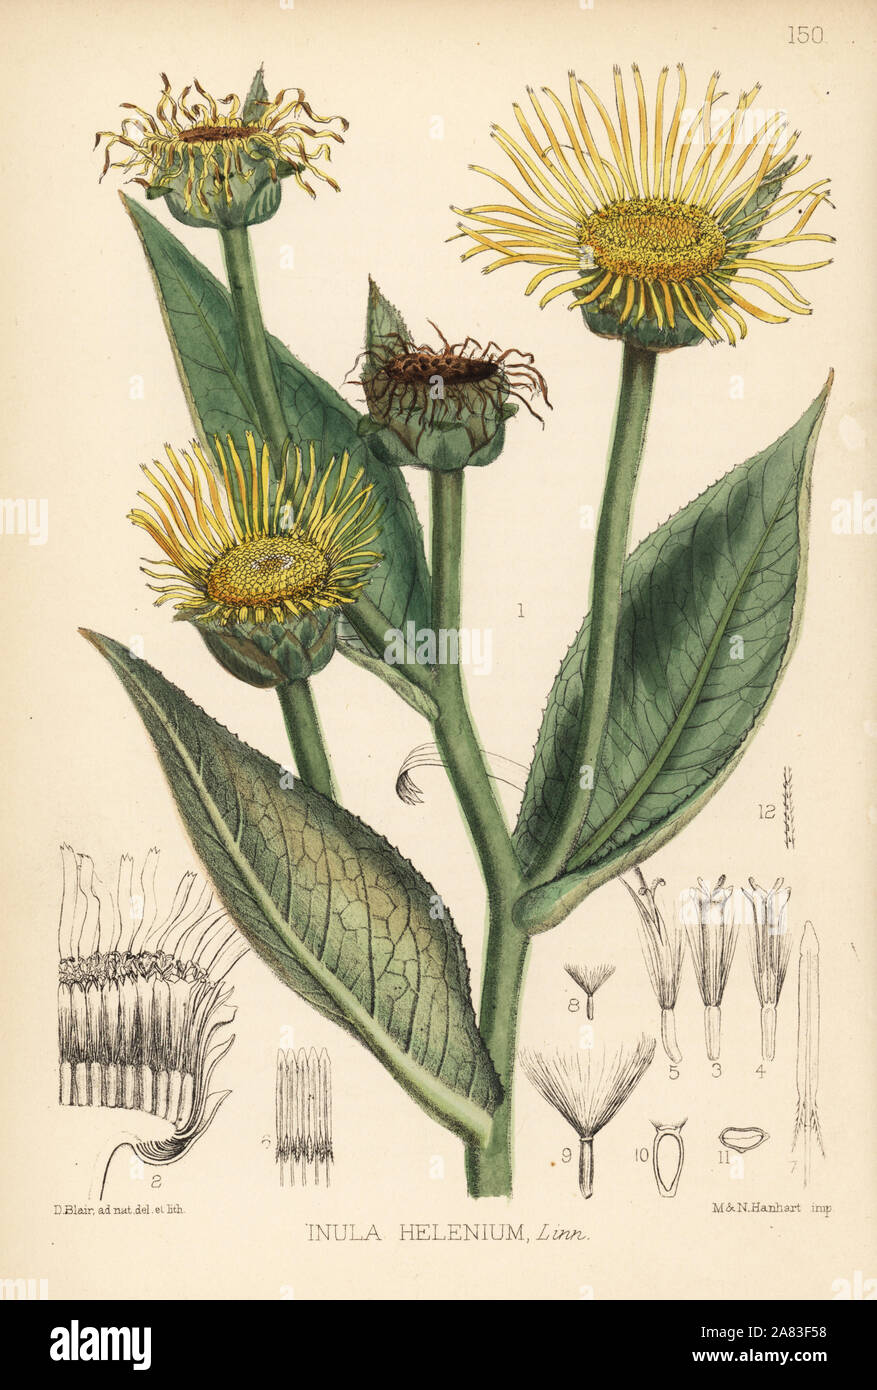 Elecampane, Inula helenium. Handcoloured lithograph by Hanhart after a botanical illustration by David Blair from Robert Bentley and Henry Trimen's Medicinal Plants, London, 1880. Stock Photo